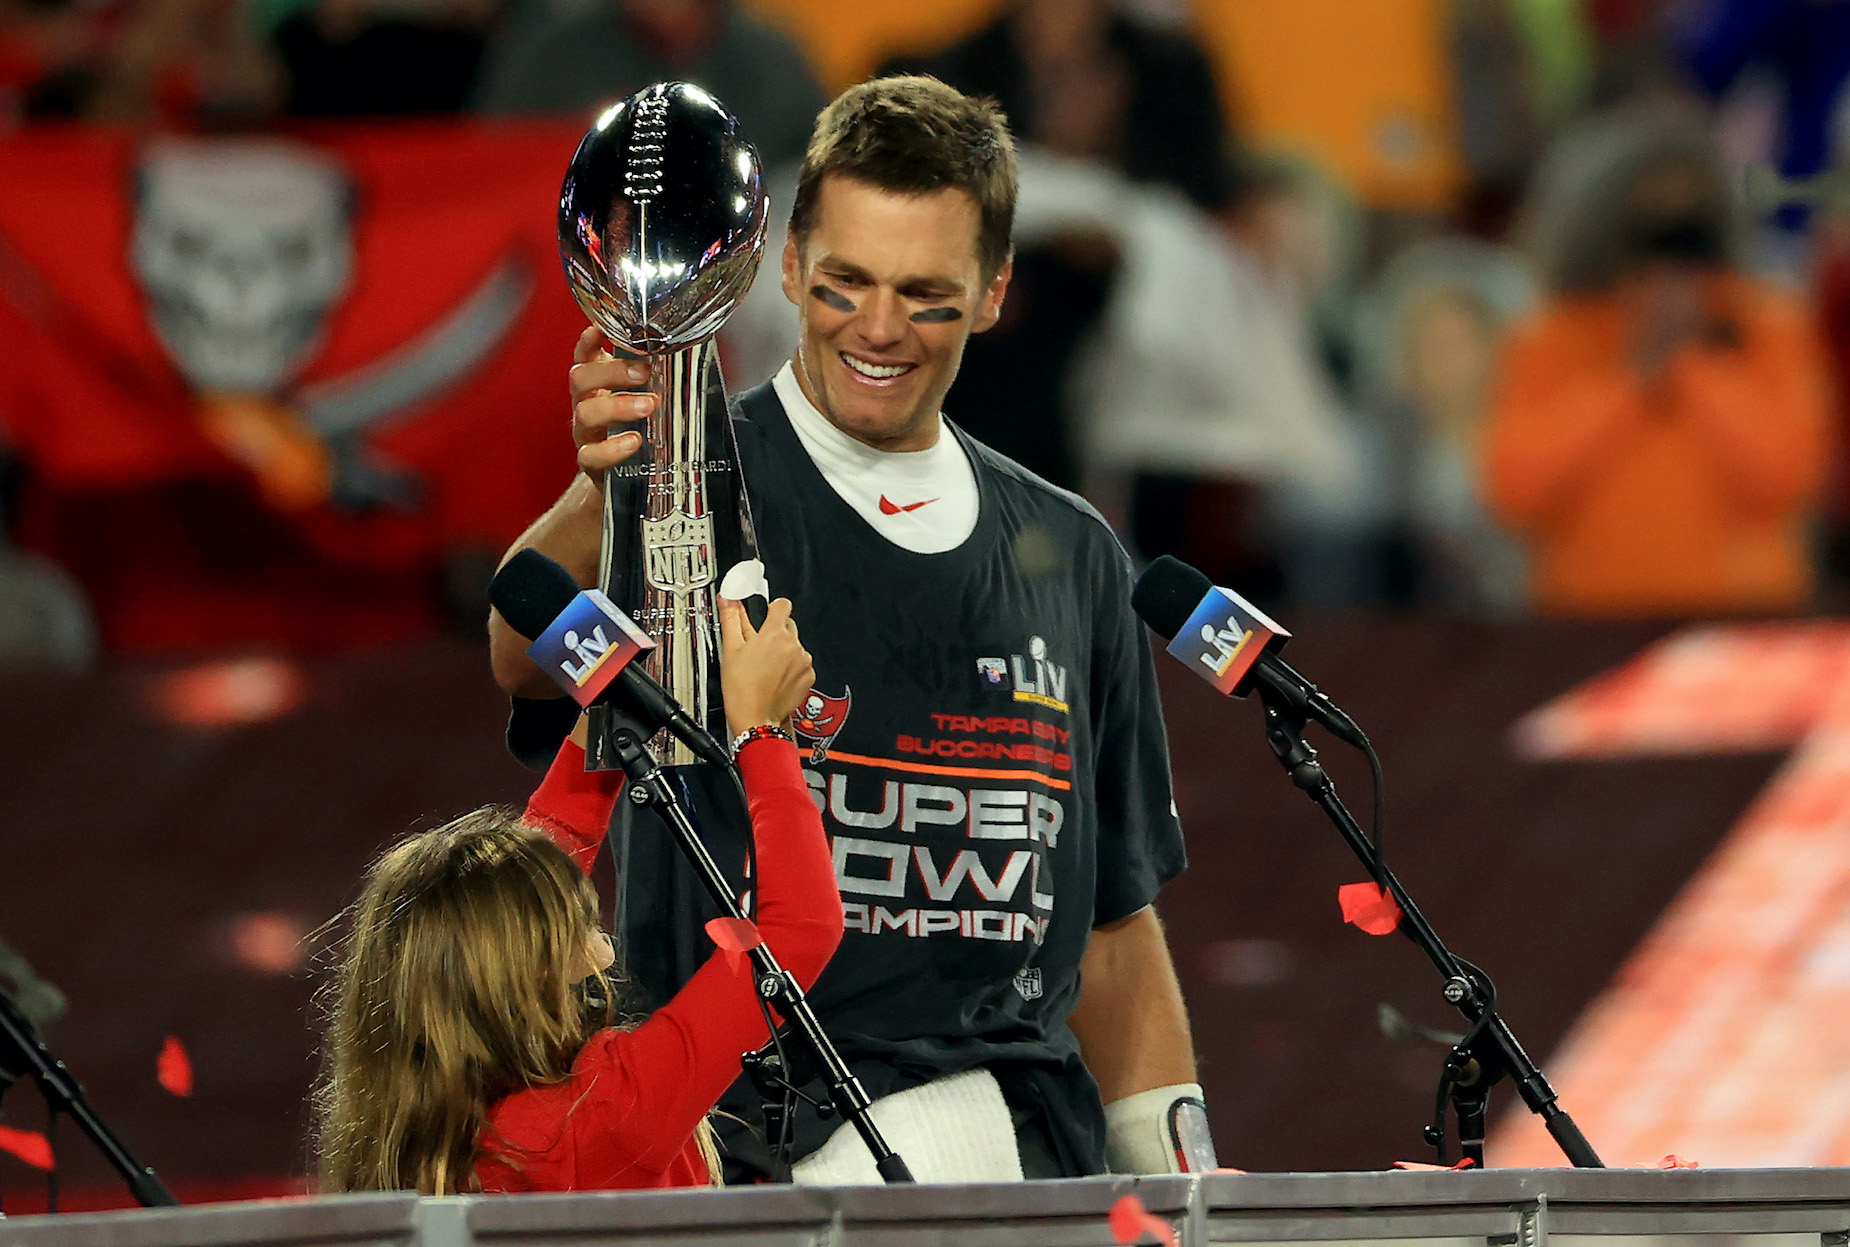 Tom Brady lifts the Lombardi Trophy after winning the Super Bowl in February 2021.